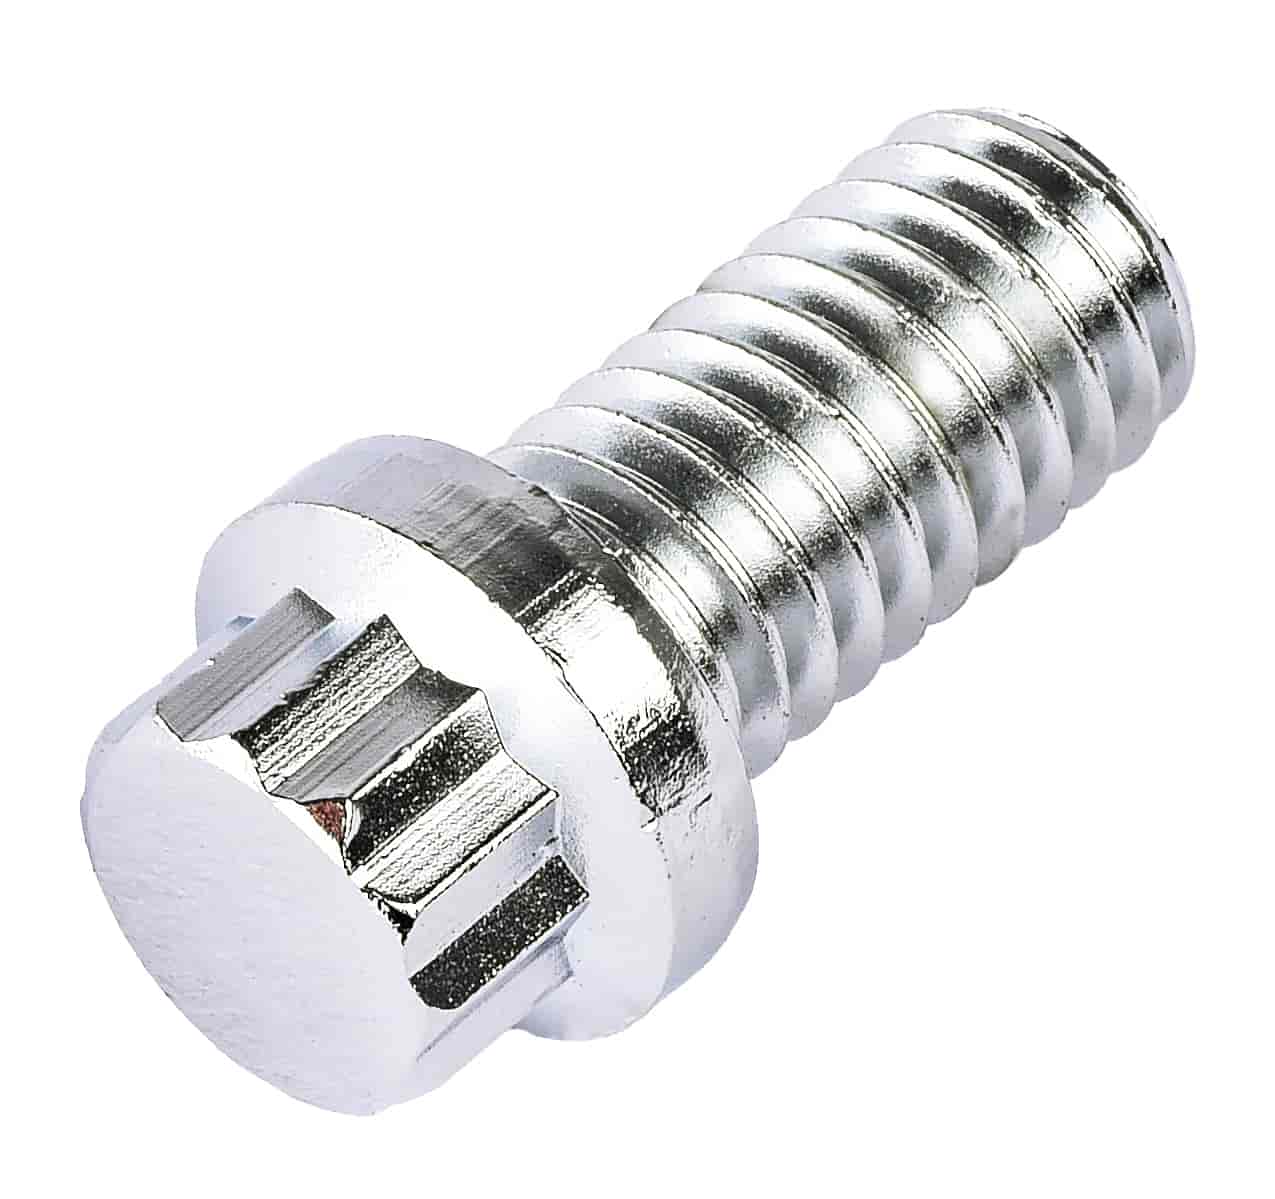 12-Point Fastener [3/8 in. -16 Thread x 3/4 (.750) in. Length]